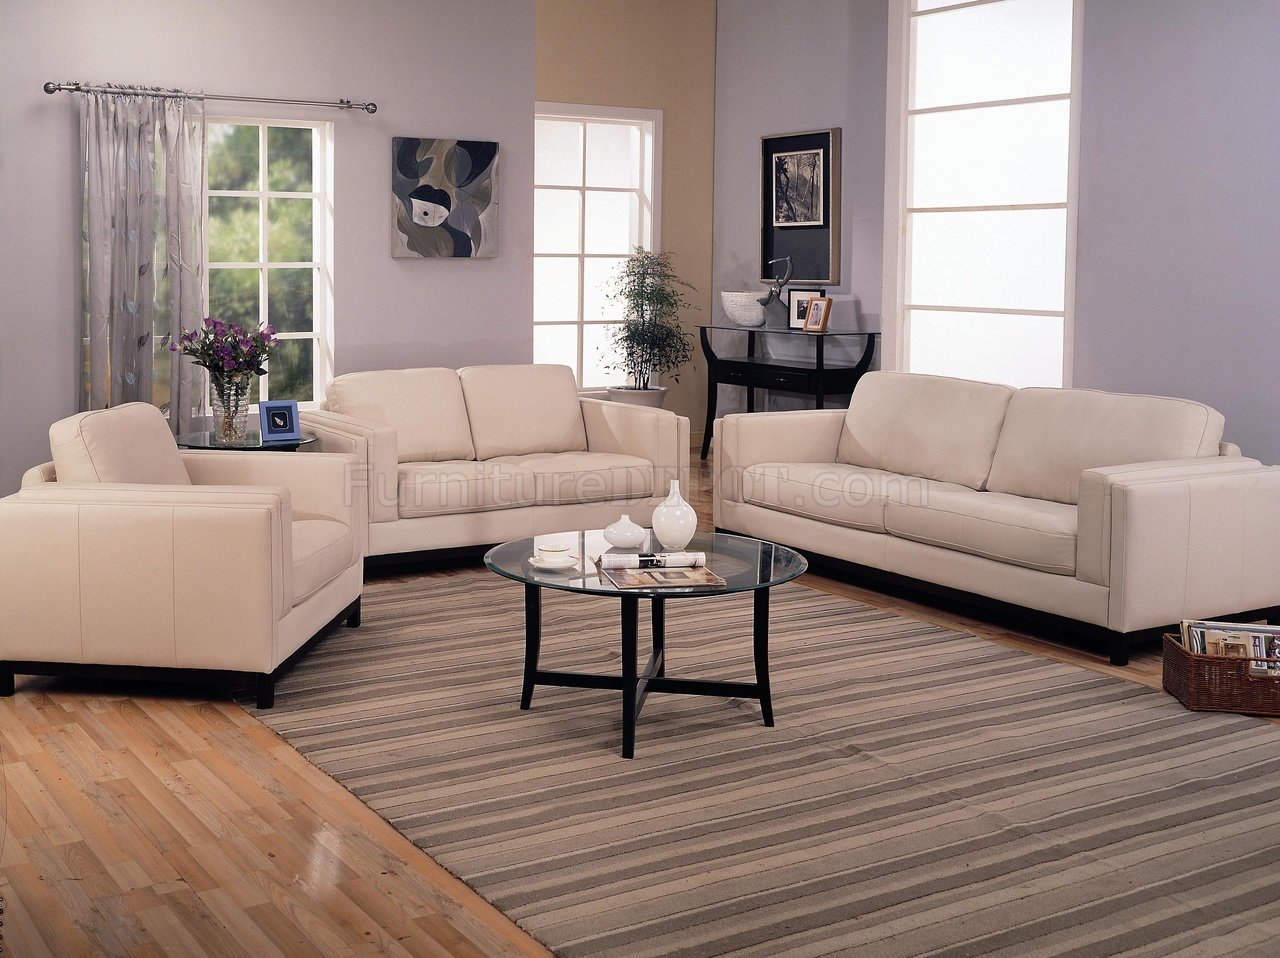 Cream Couch Living Room | Baci Living Room